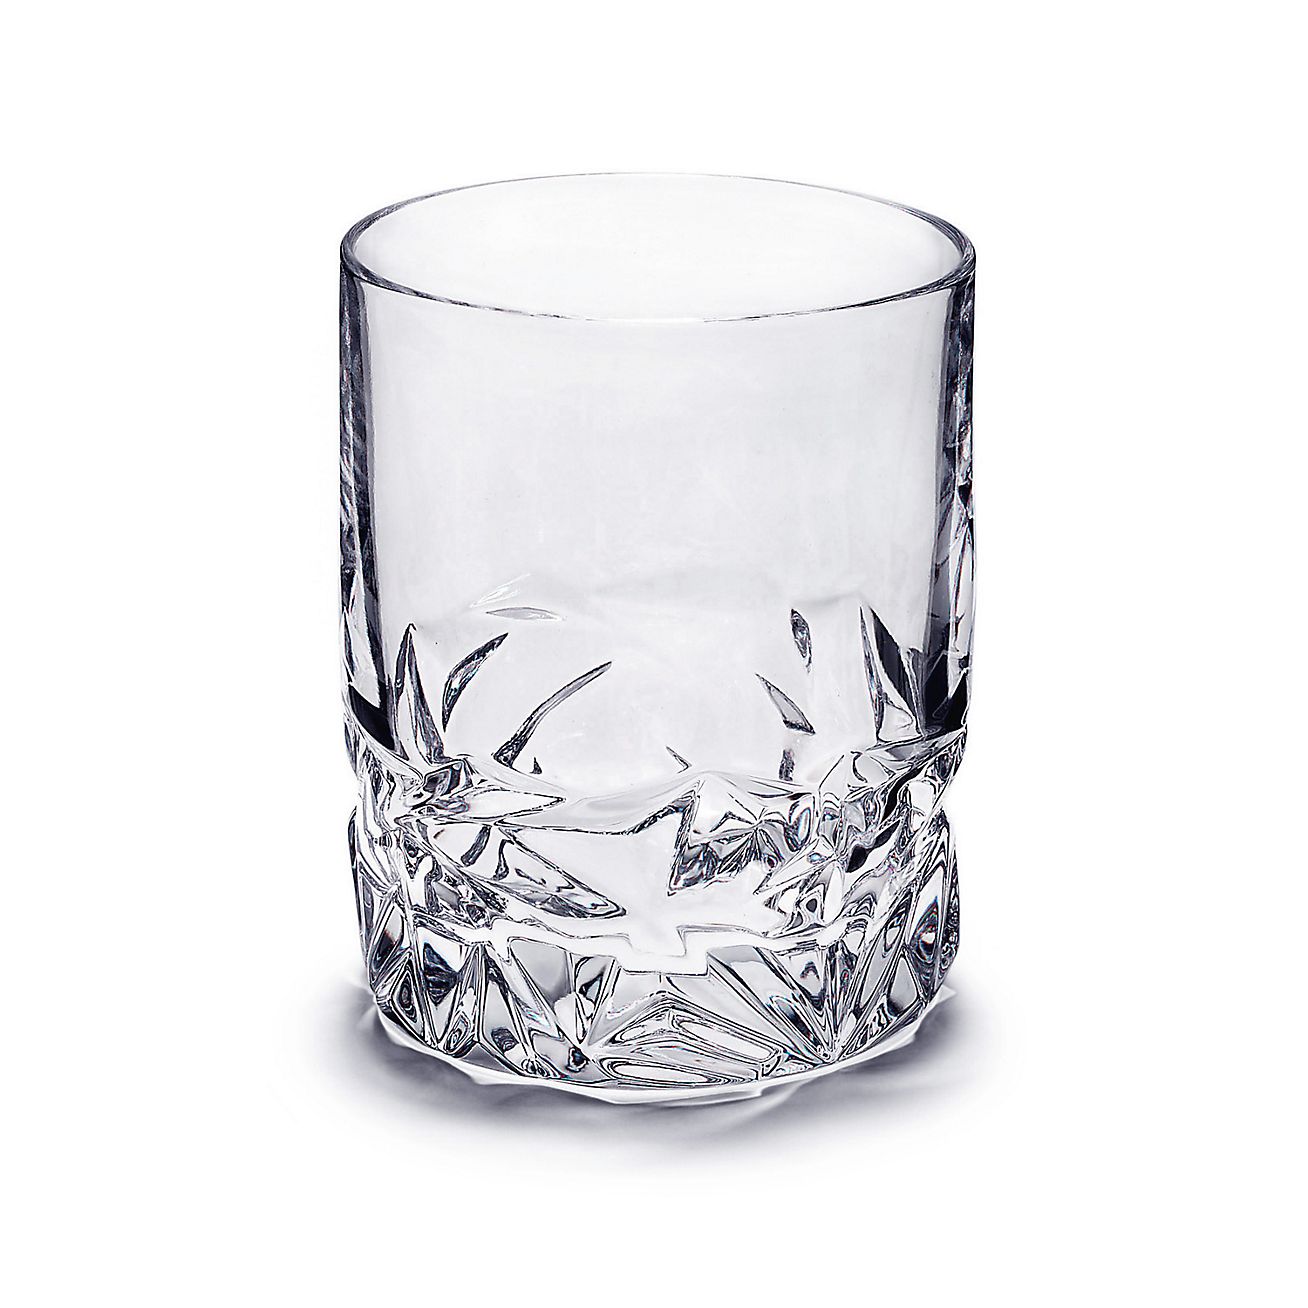 Rock-cut double old-fashioned glass in 